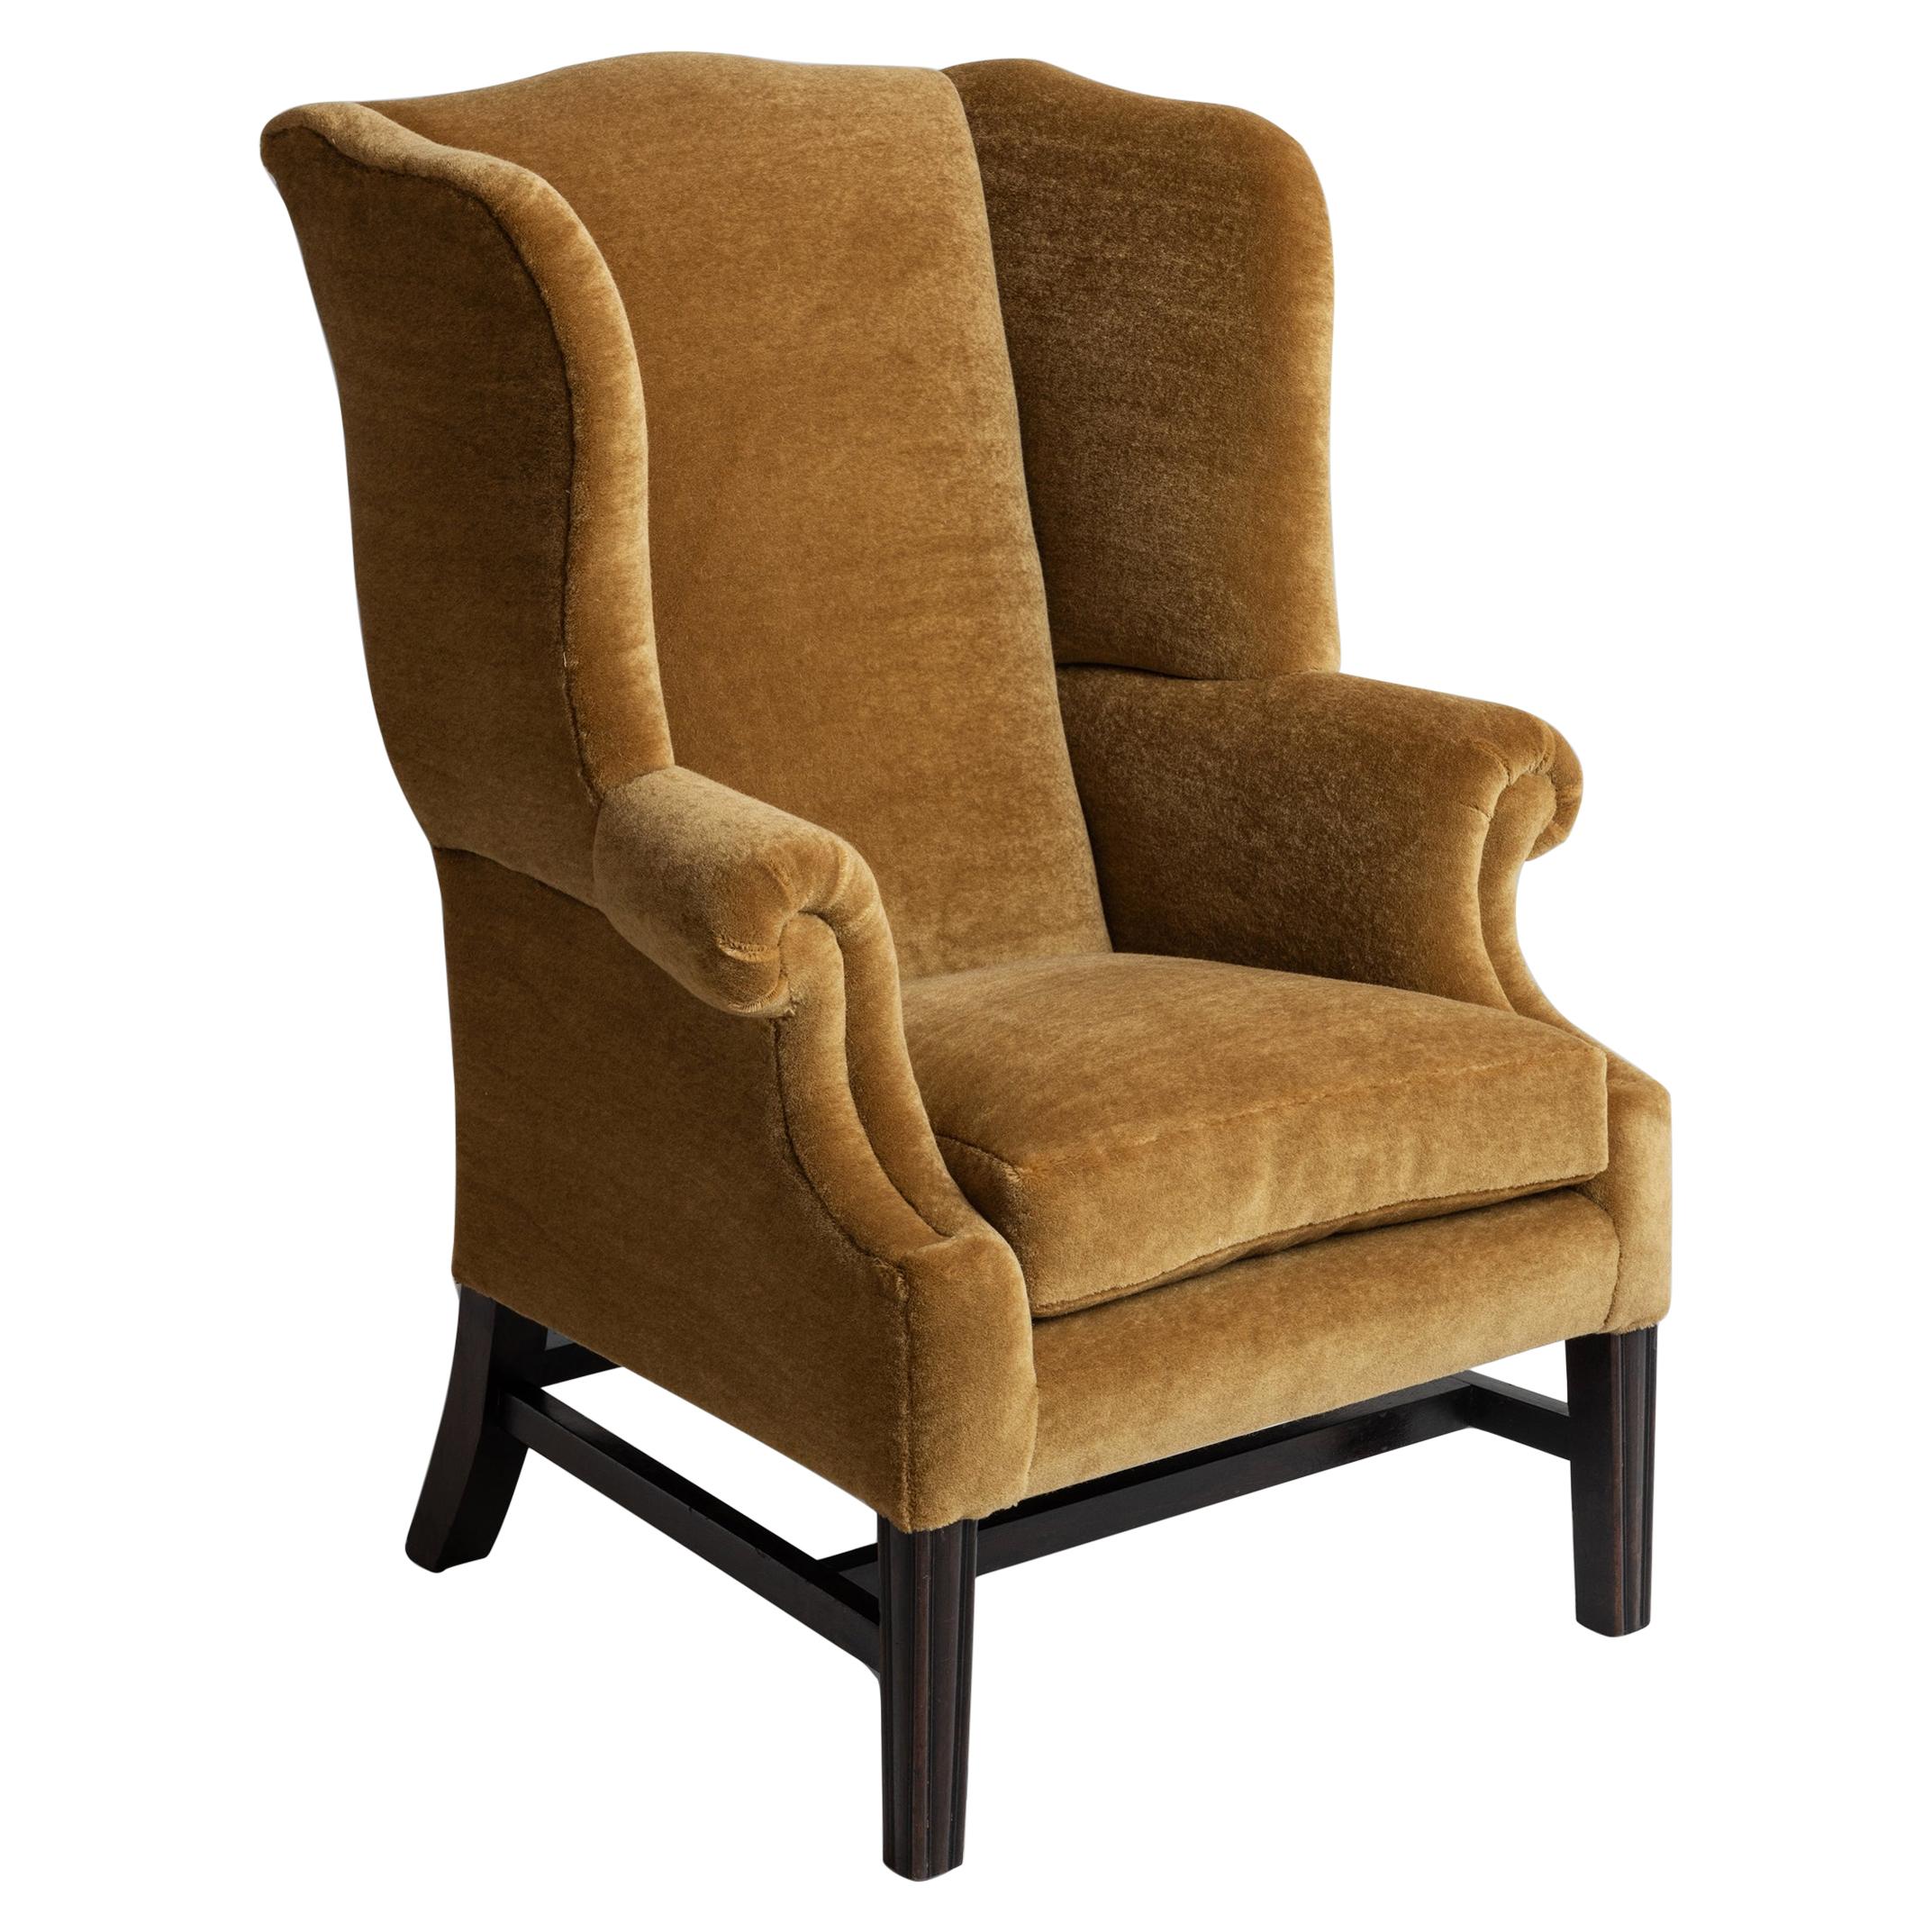 Wingchair in Teddy Mohair by Pierre Frey 'Moutarde' England, circa, 1880